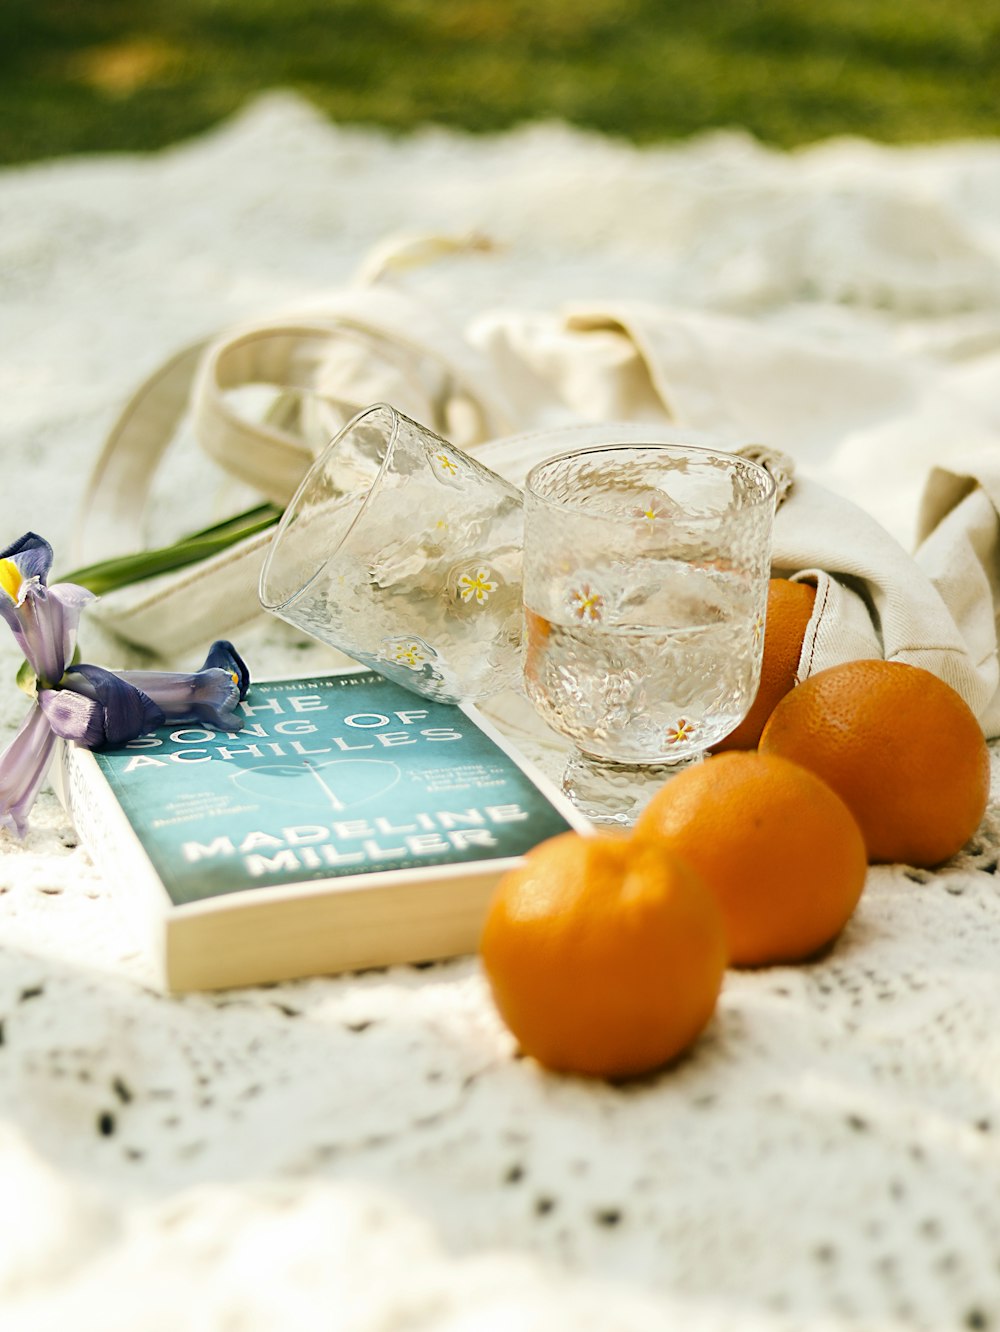 a book and some oranges on a table